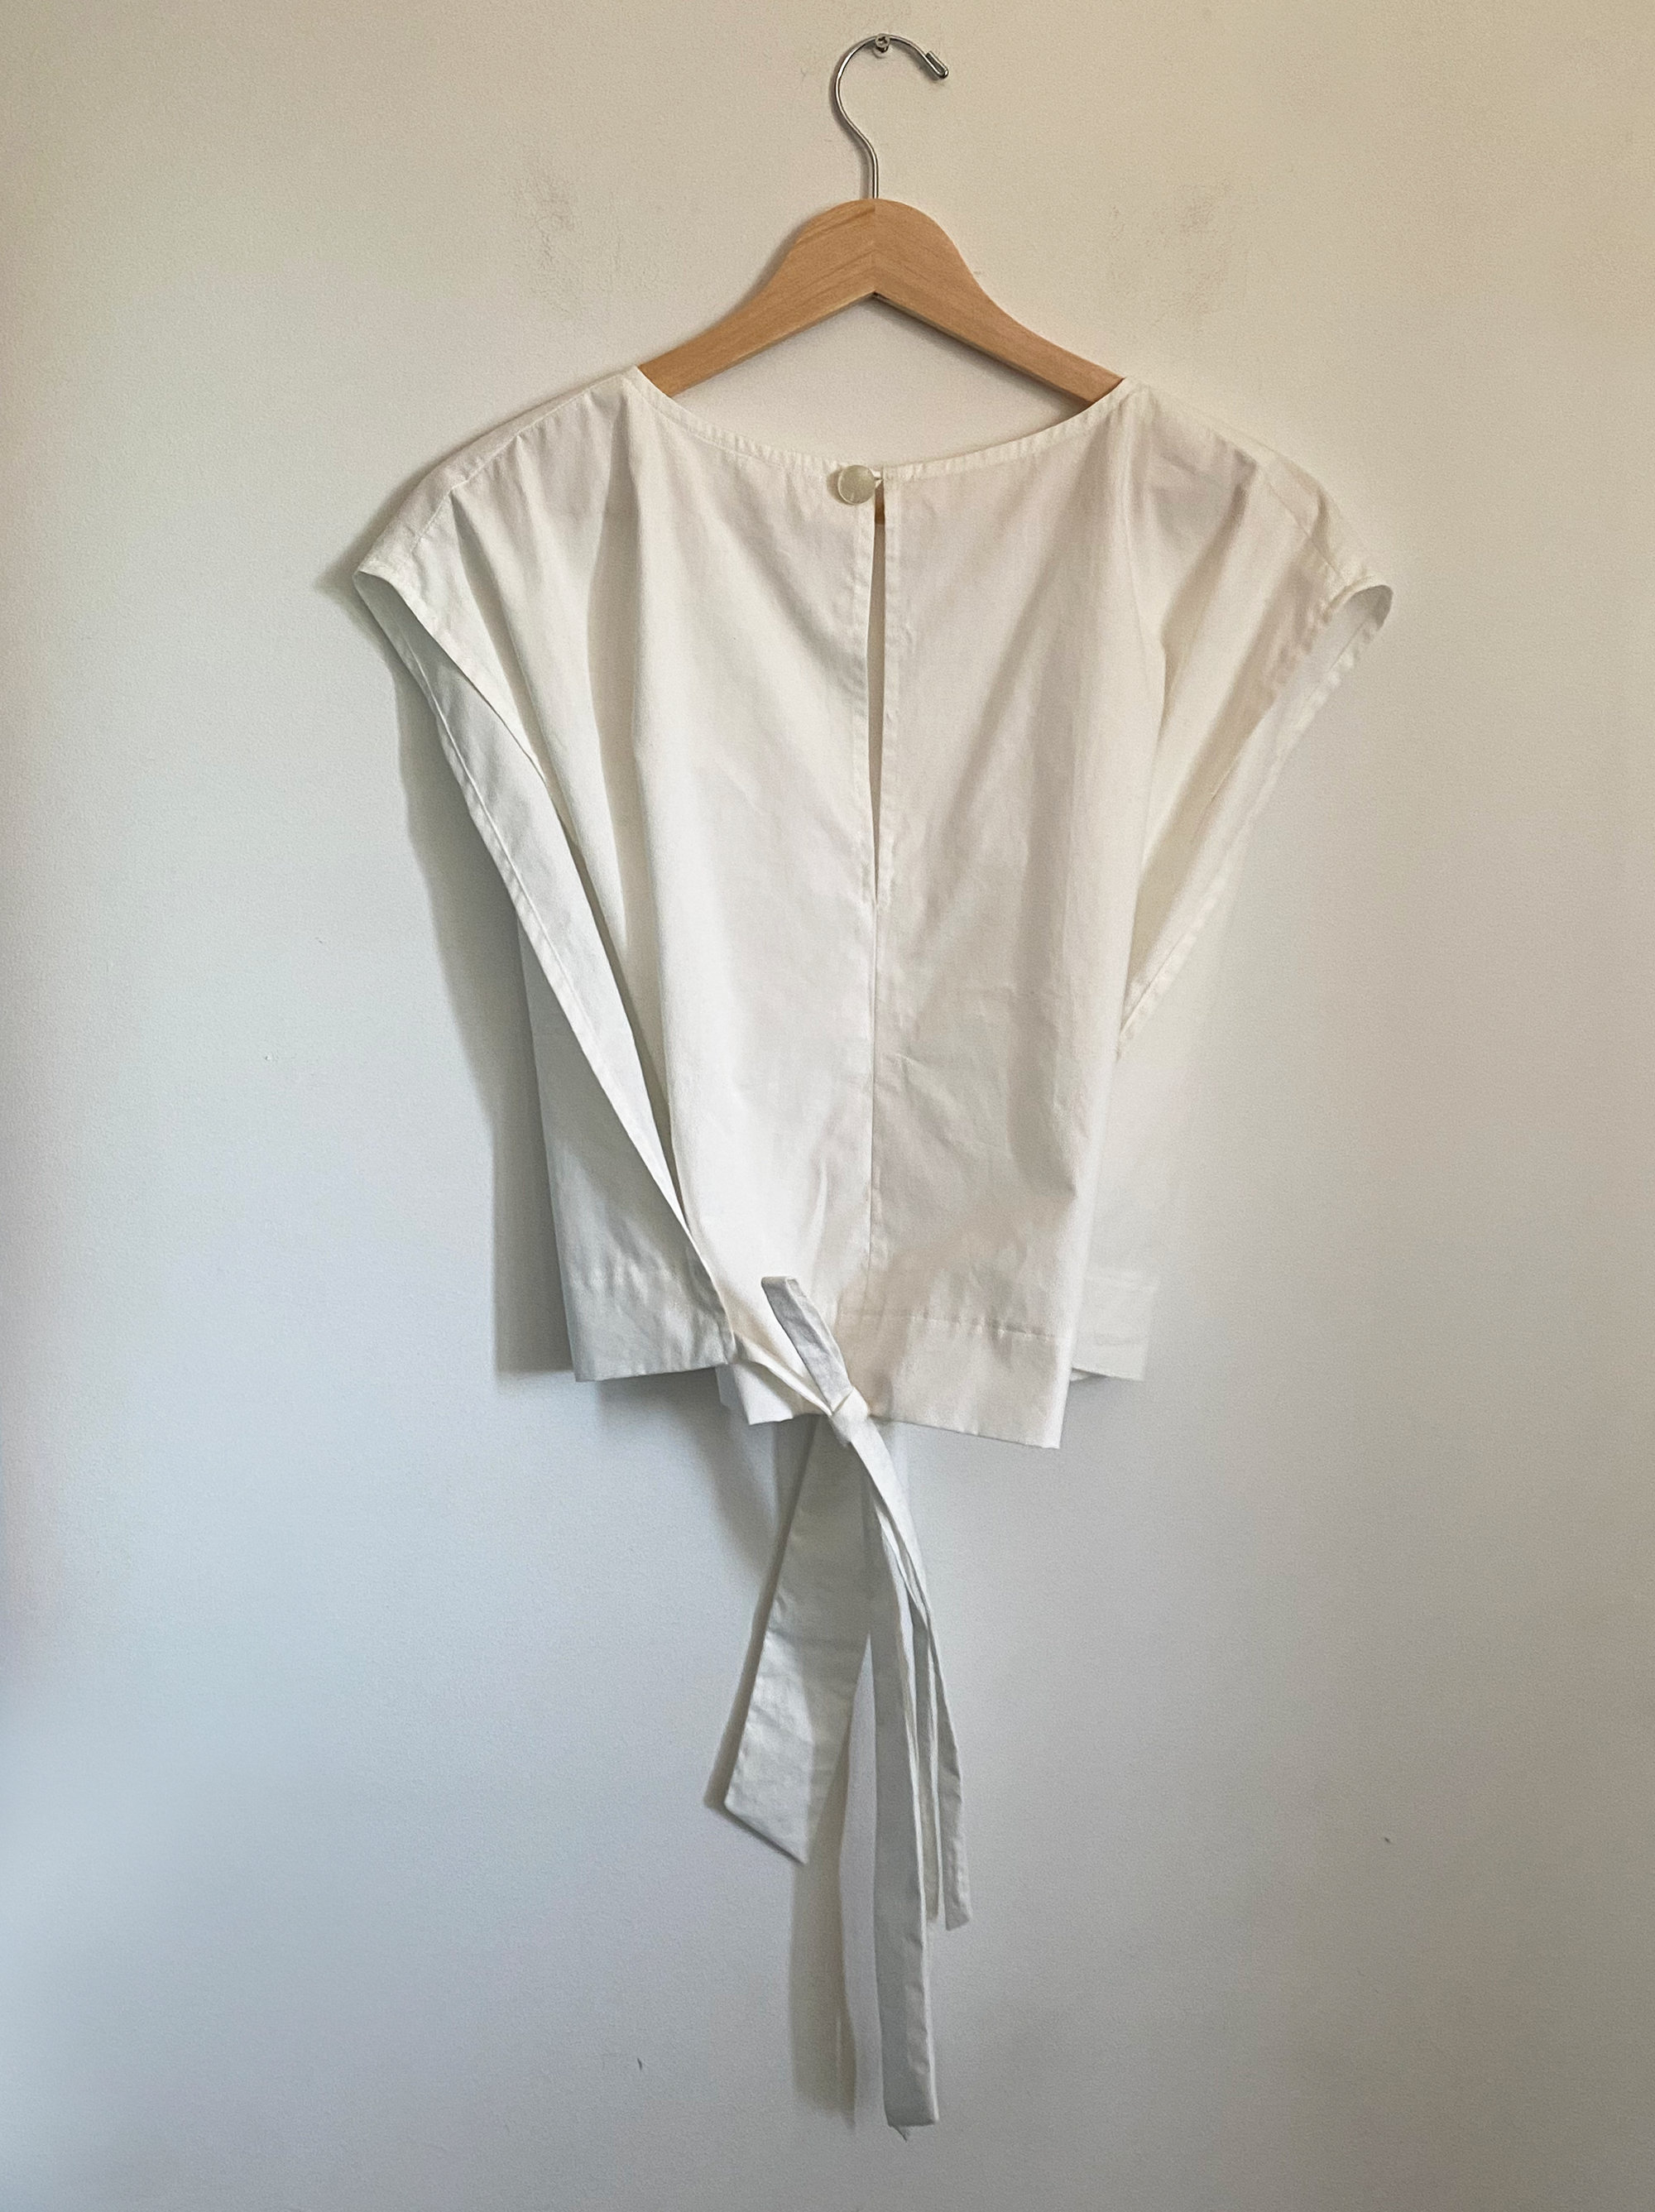 Cotton Poplin Wrap Top W/ Self Ties & Mother of Pearl Button - Etsy